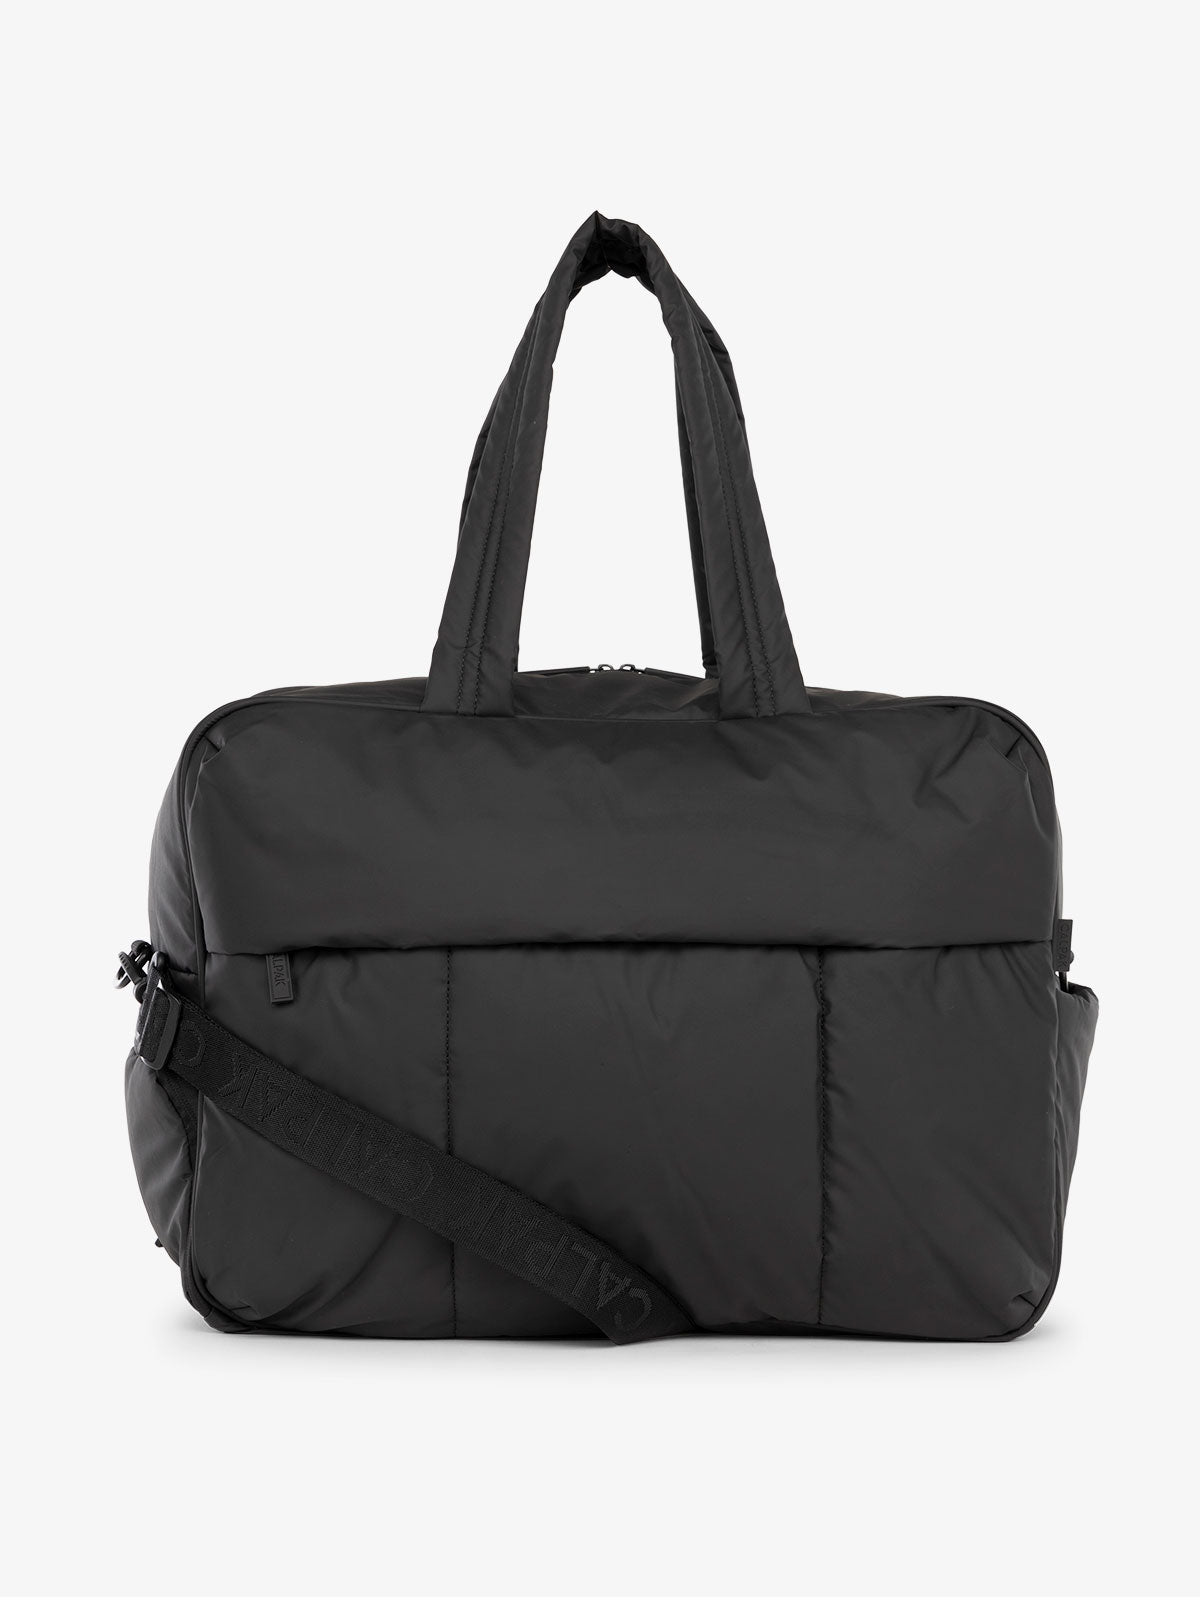 The Popular Calpak Luka Duffel Bag Is on Sale for a Limited Time